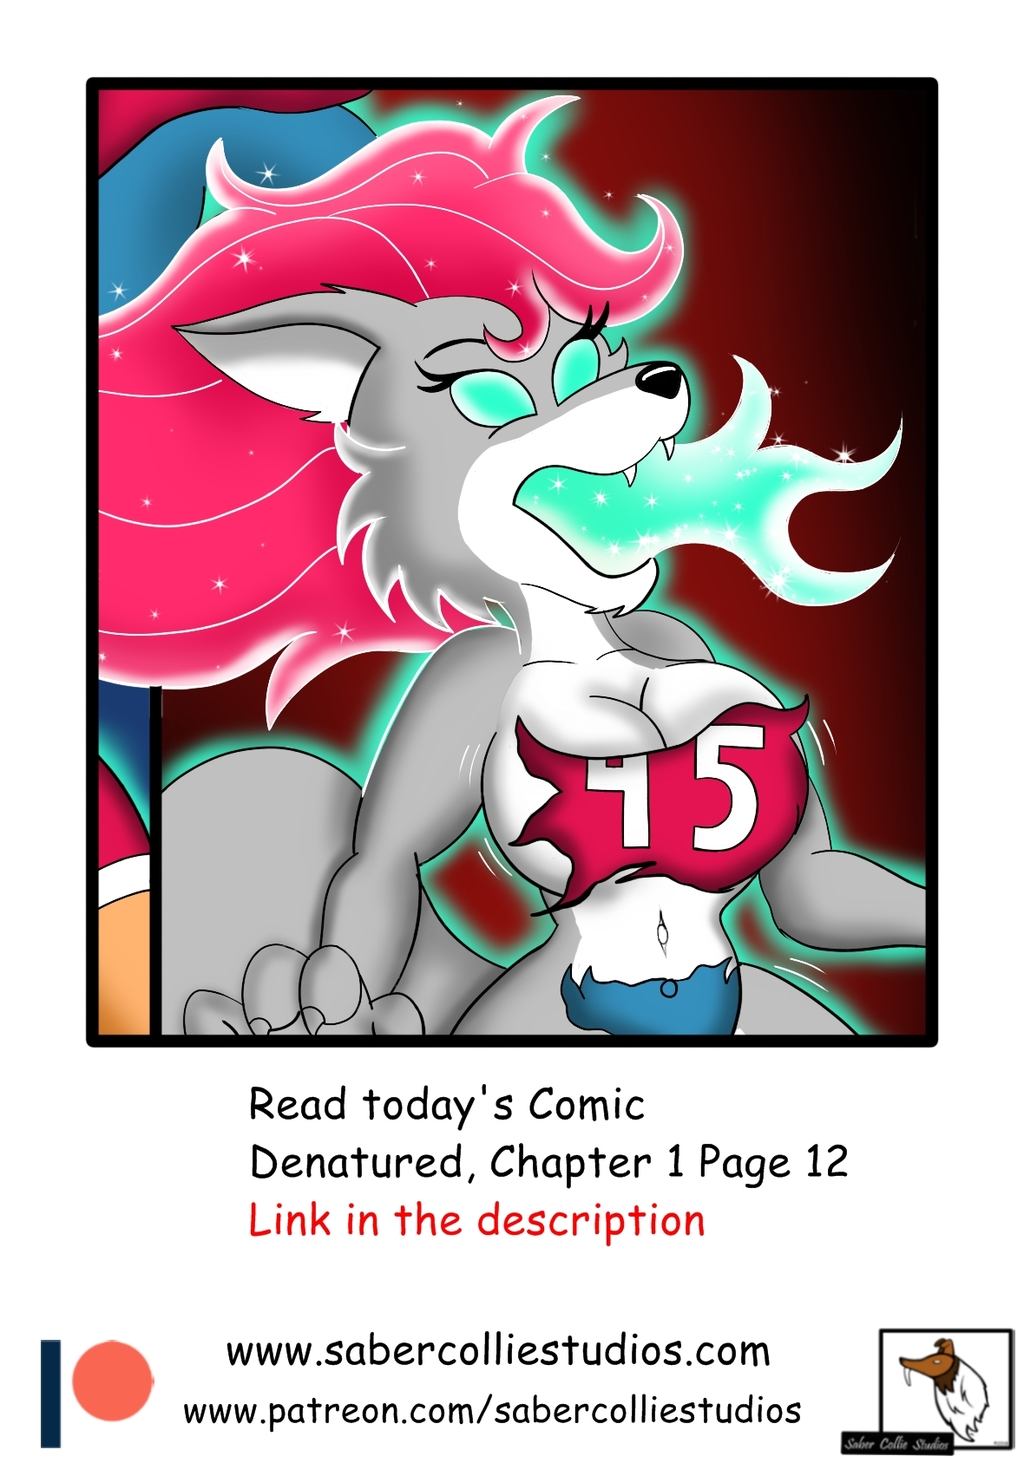 Denatured Chapter 1, Page 12